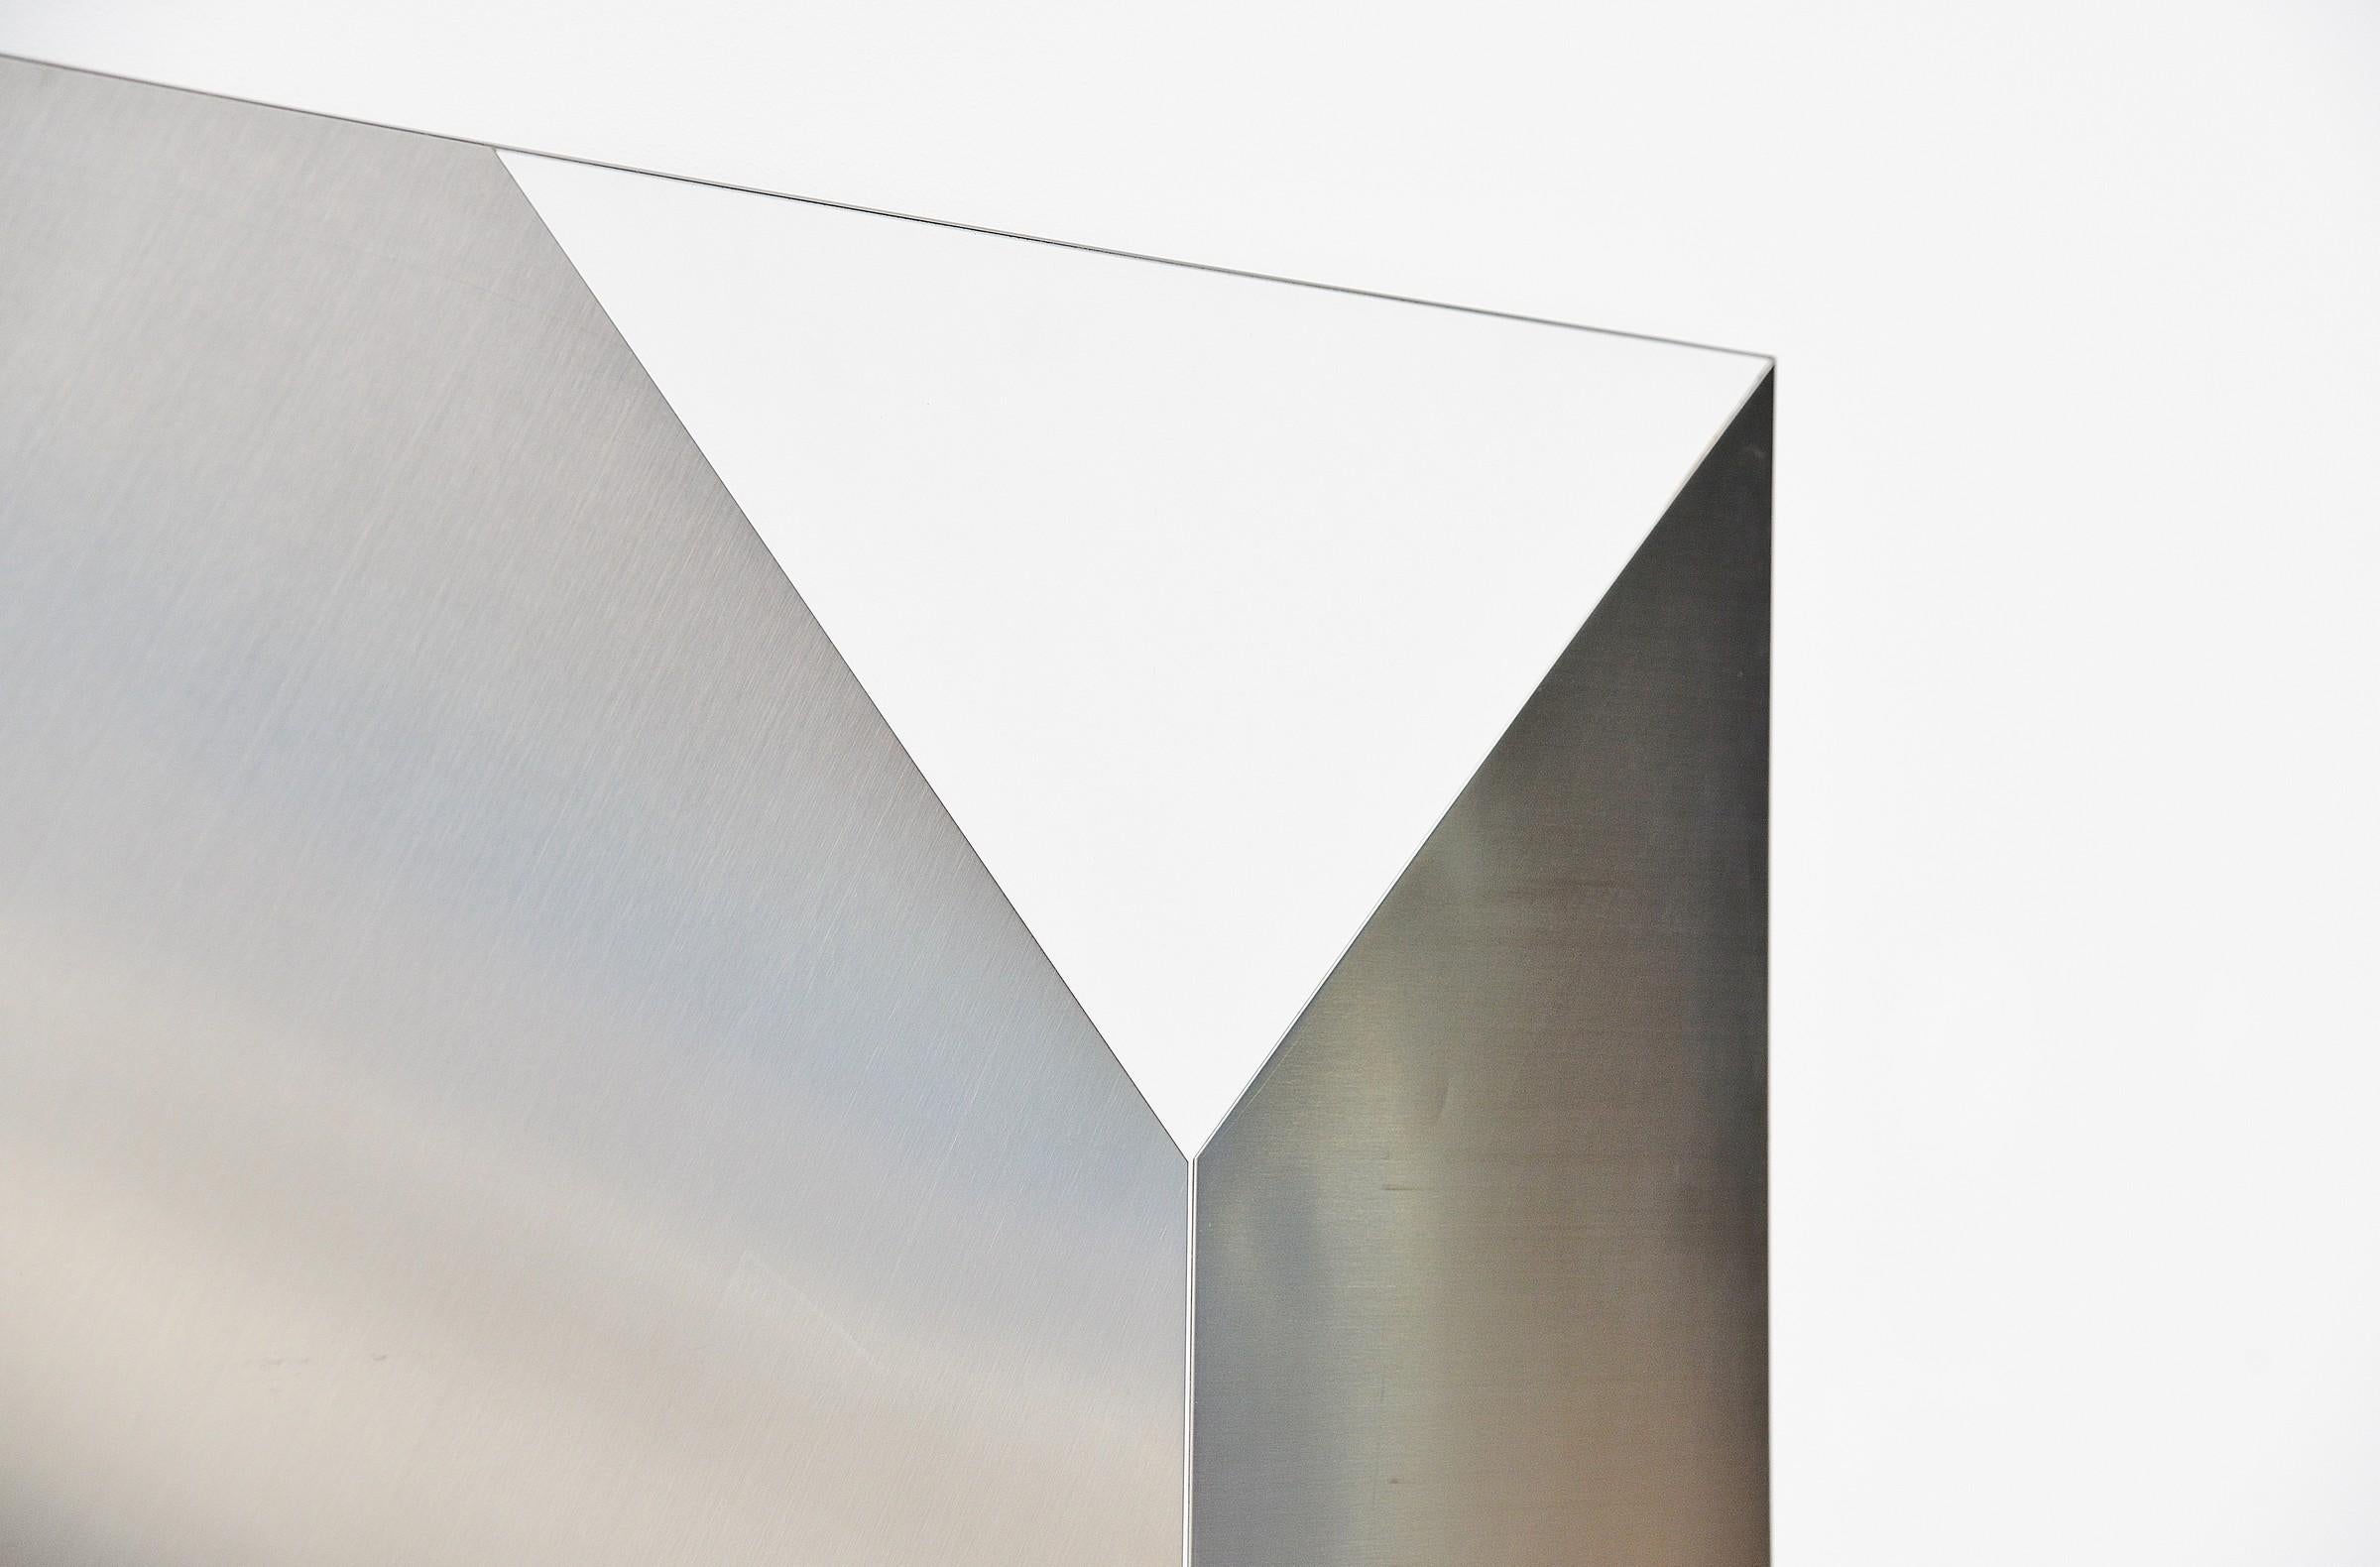 Large abstract modern shaped stainless steel wall artwork designed by Rudolf Wolf and manufactured in his own atelier in 1972. This wall panel is made of white laminated board and has a stainless steel abstract modern configuration on it. This